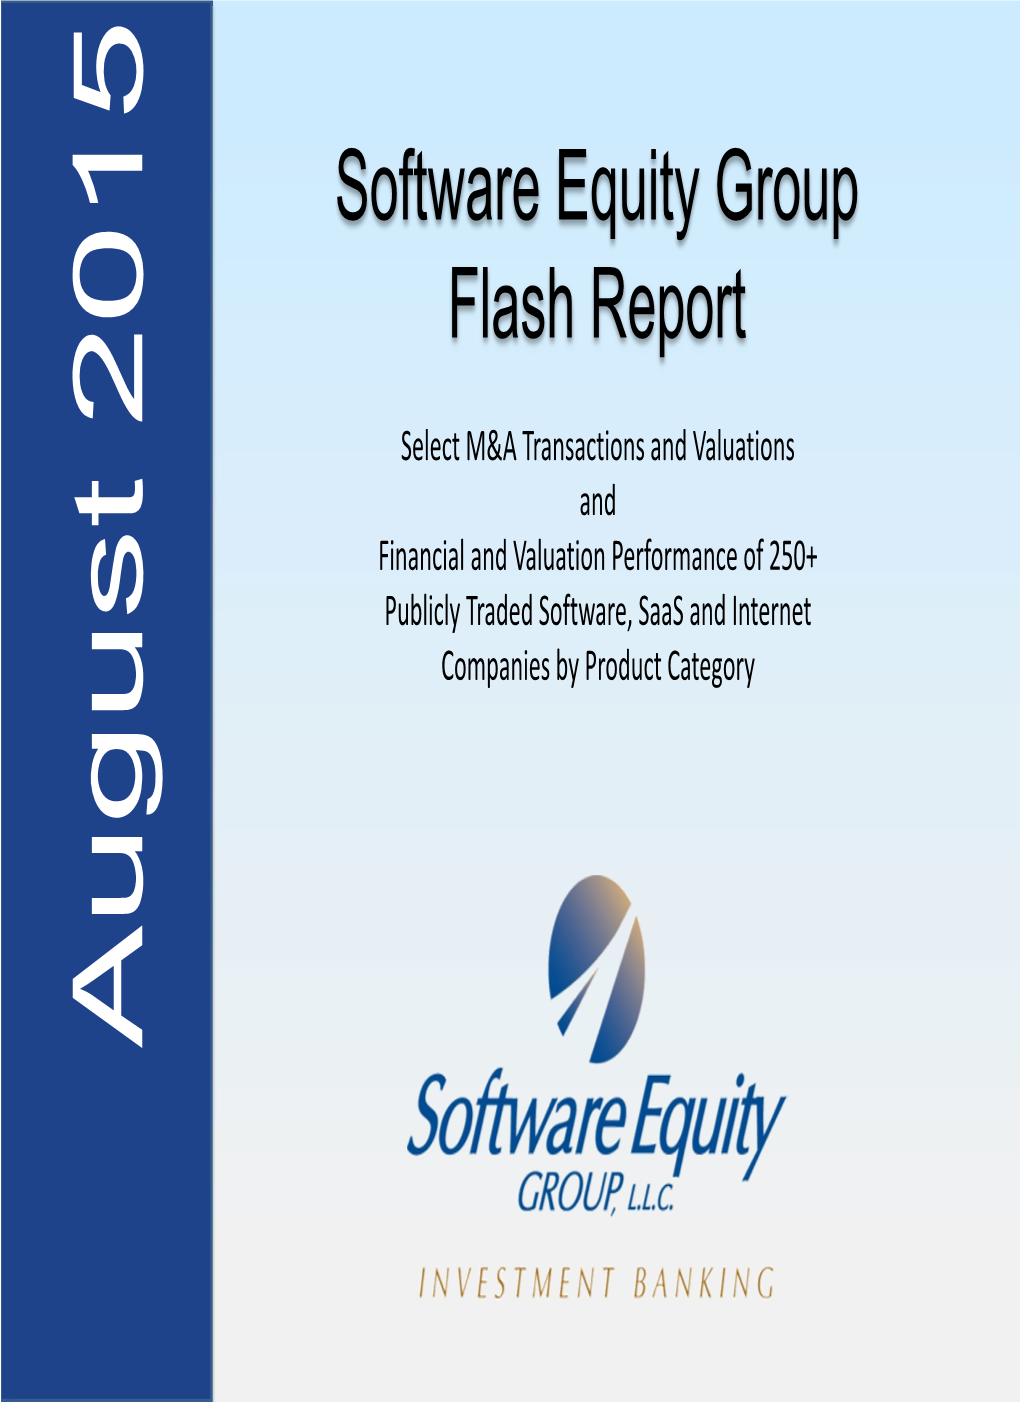 Software Equity Group Flash Report